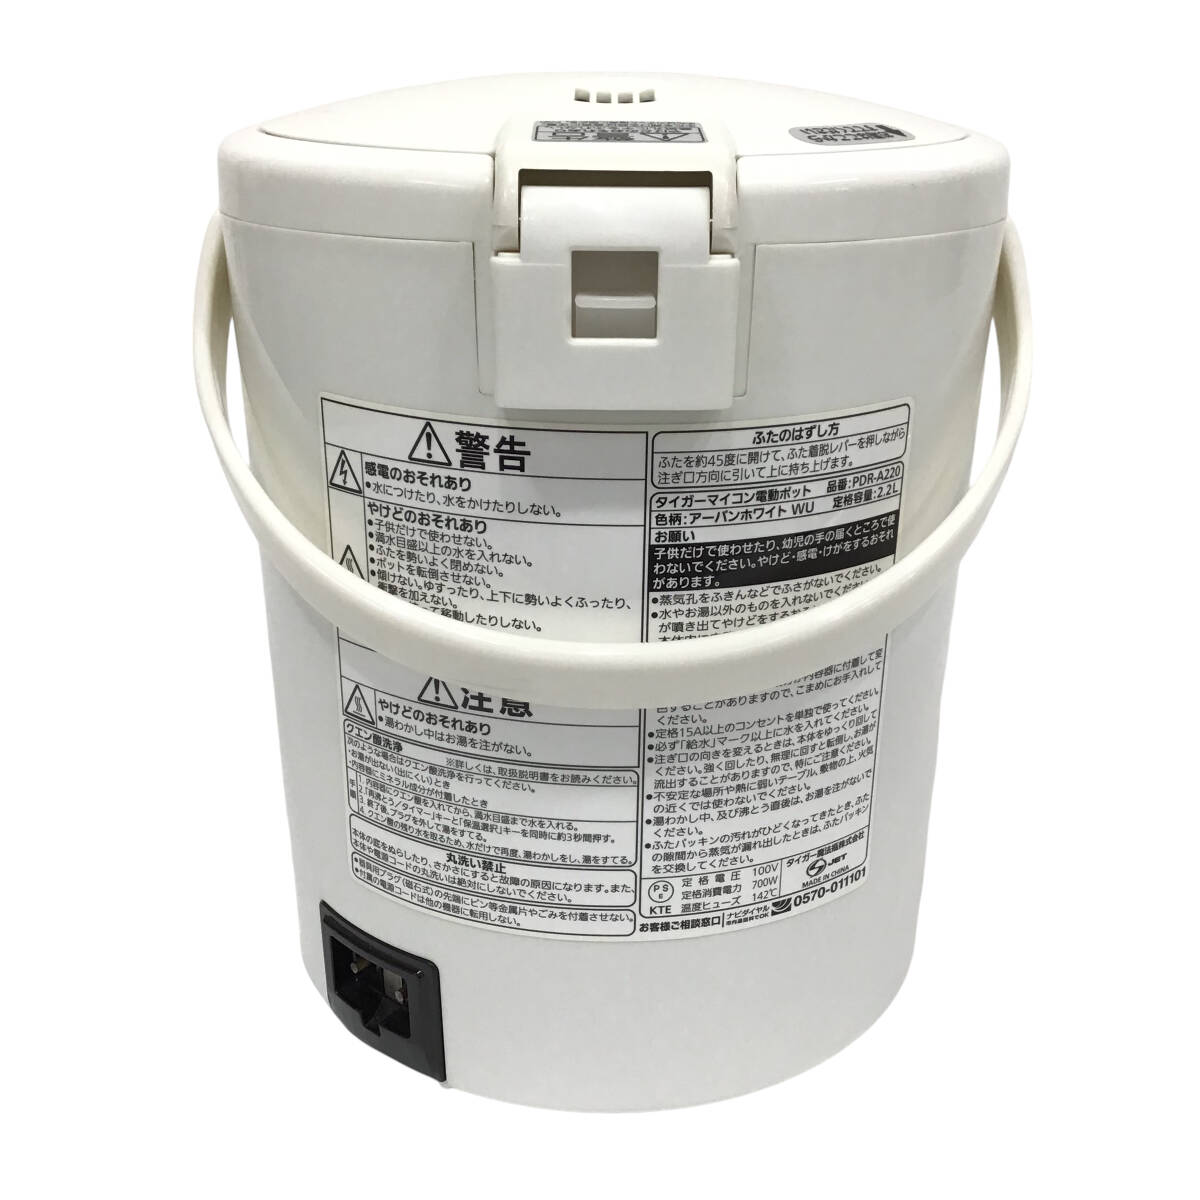 24R175ji3 TIGER microcomputer hot water dispenser PDR-A220 urban white 2.2L secondhand goods 